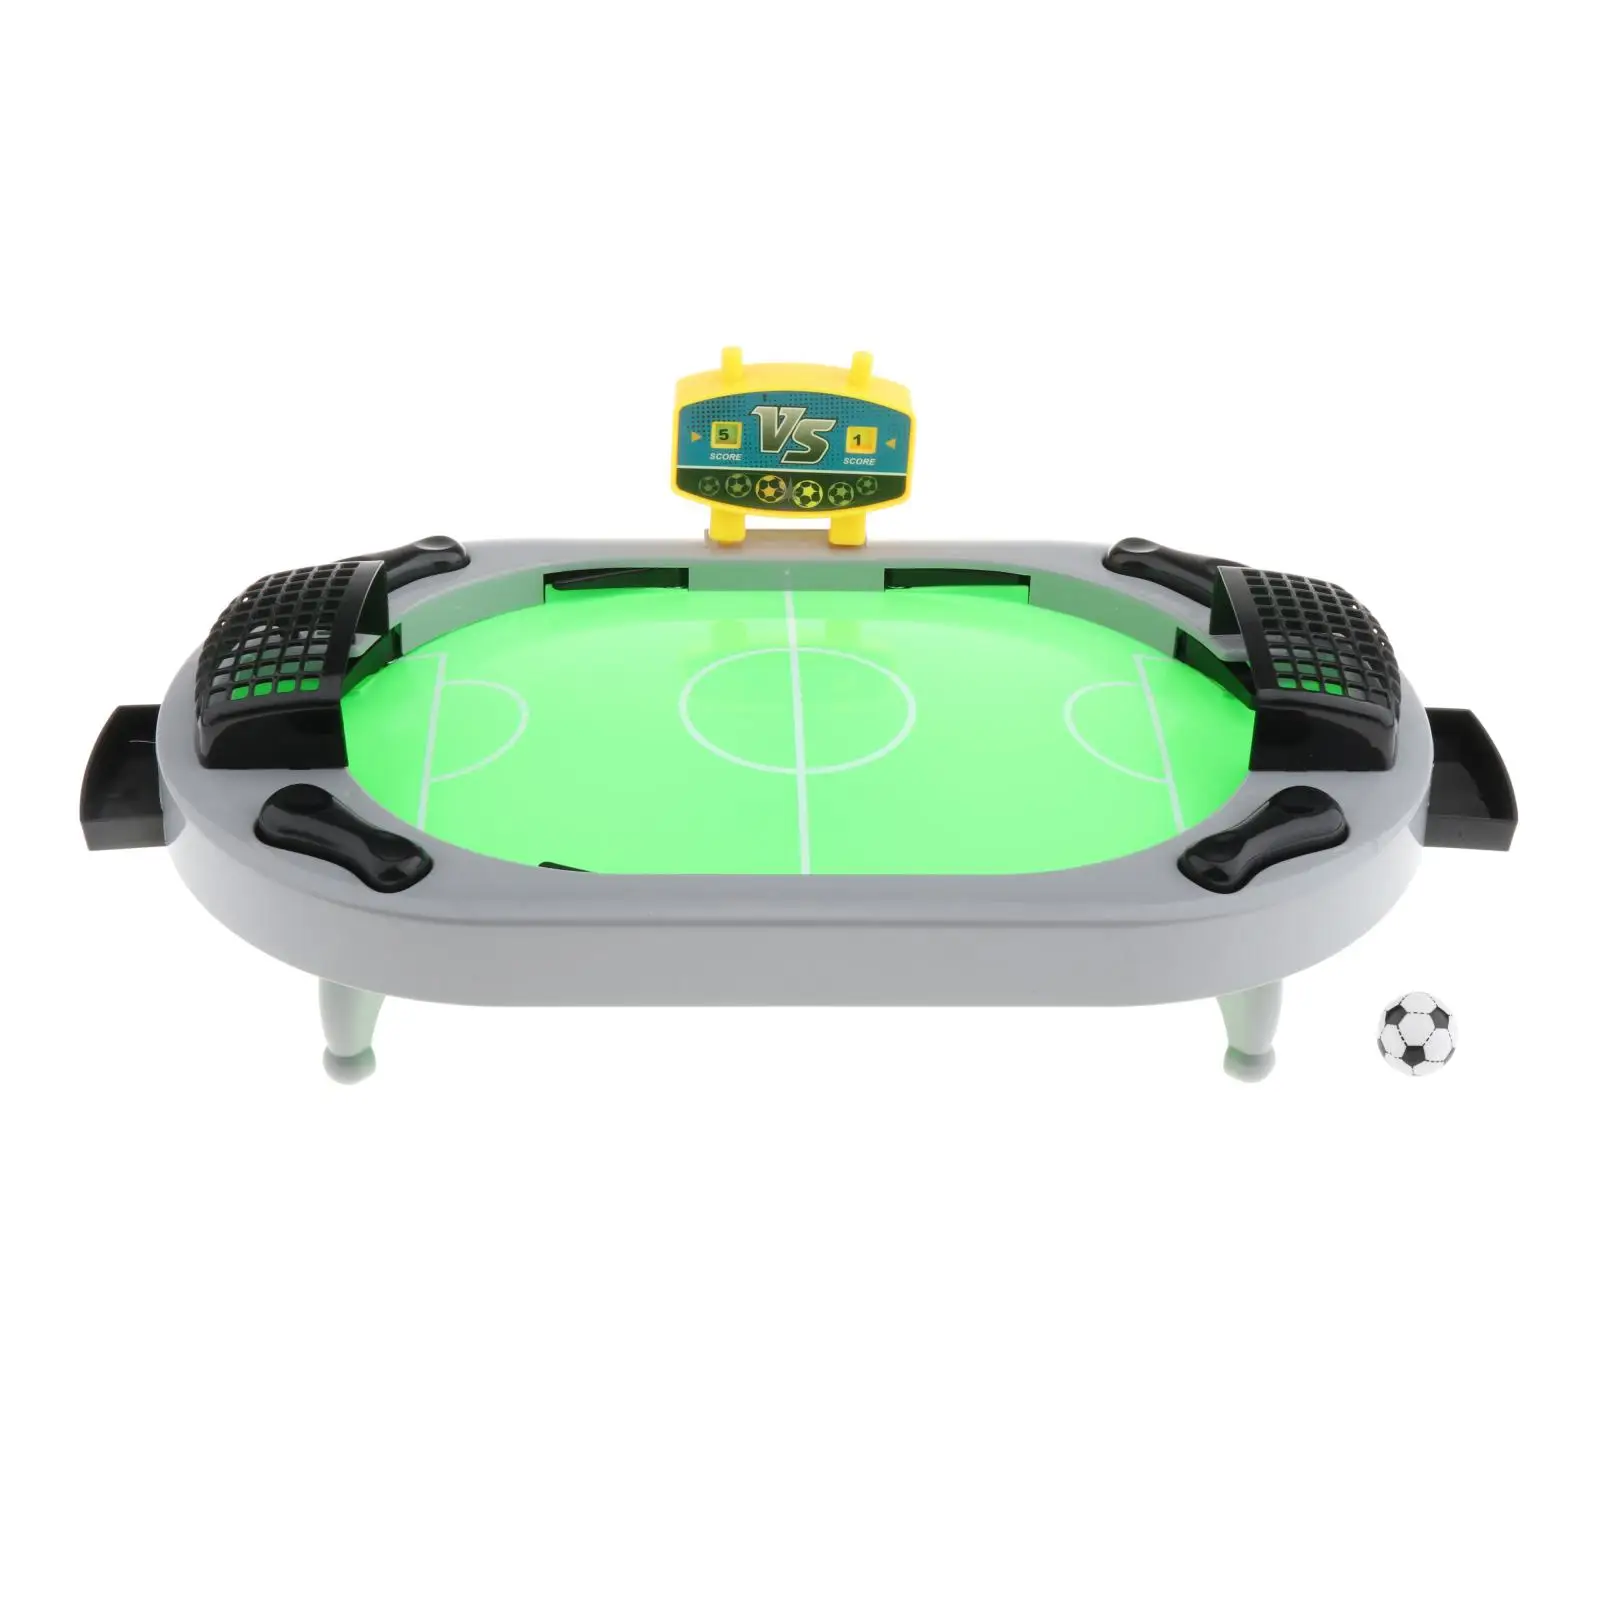 Soccer Board Game,Mini Tabletop Table Soccer Toy,Shooting Defending Board